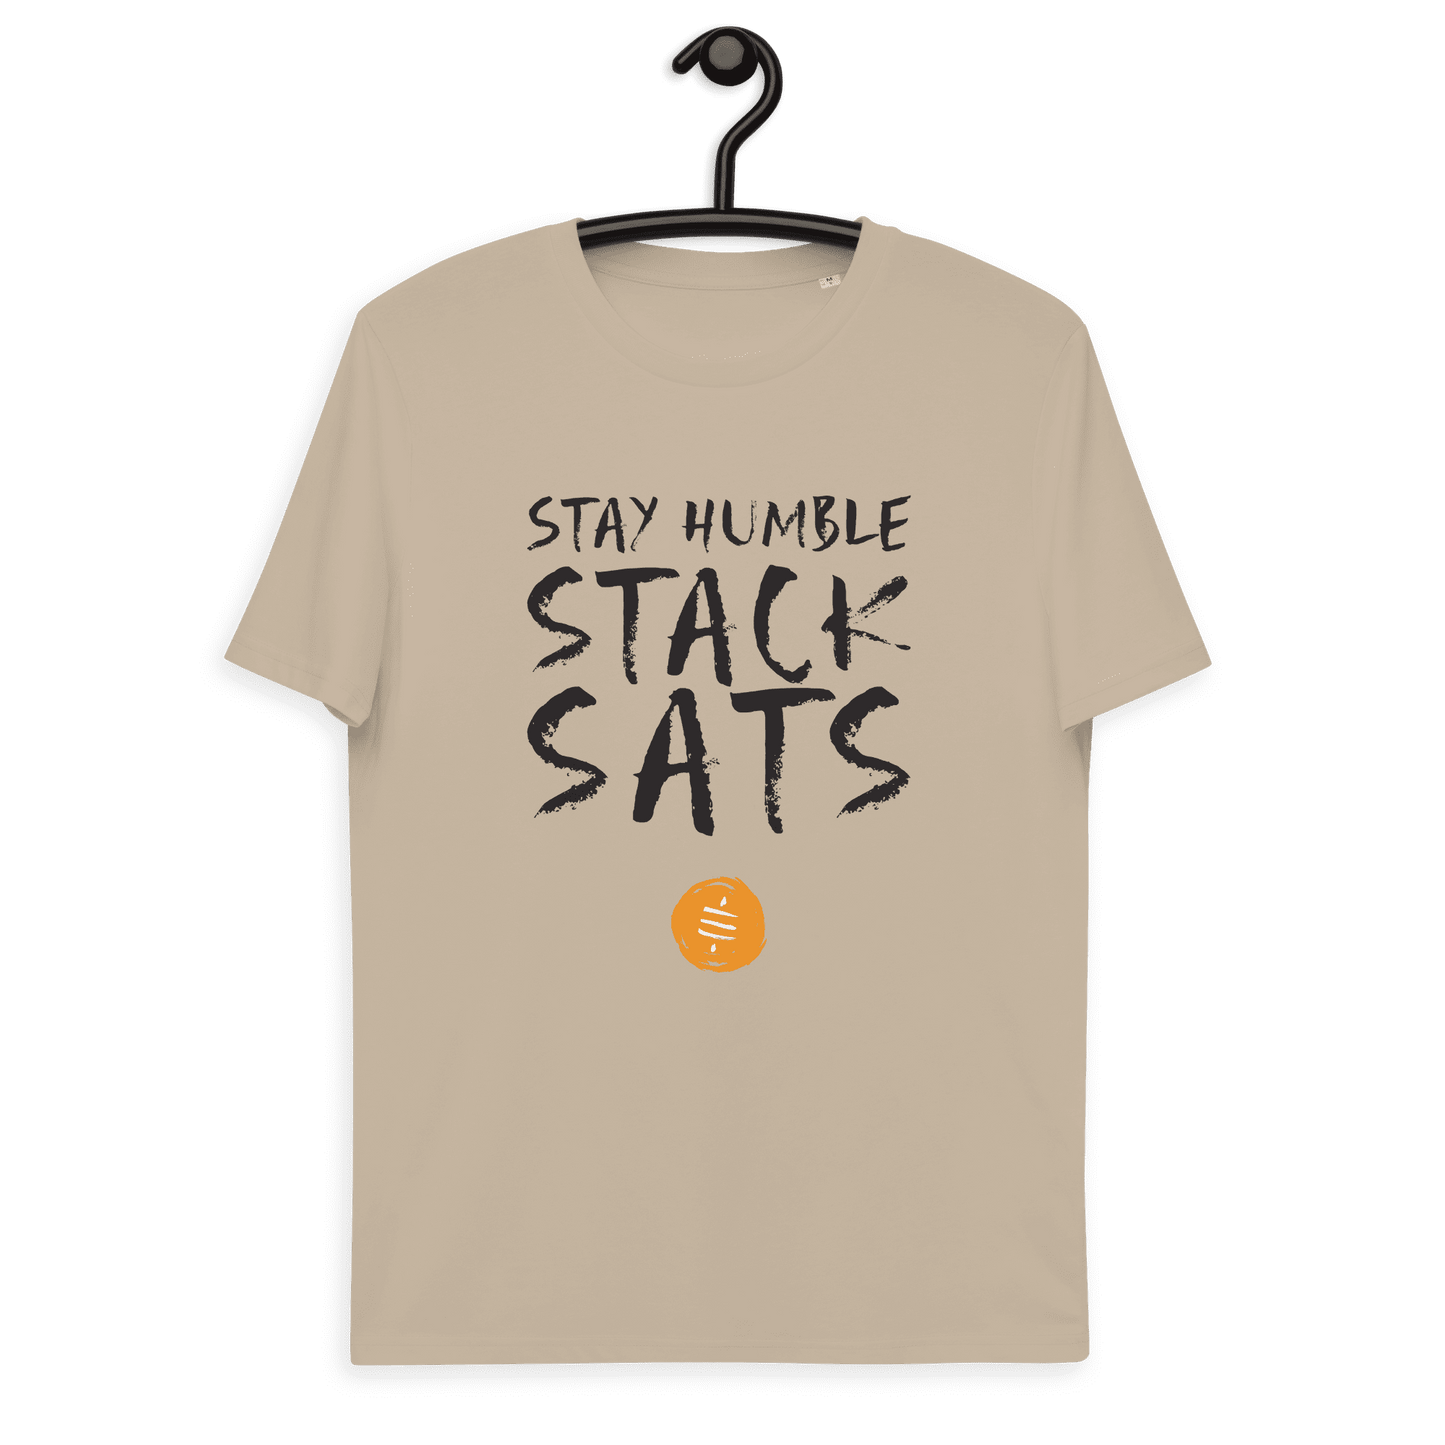 Front view of a dersert dust colored bitcoin t-shirt.